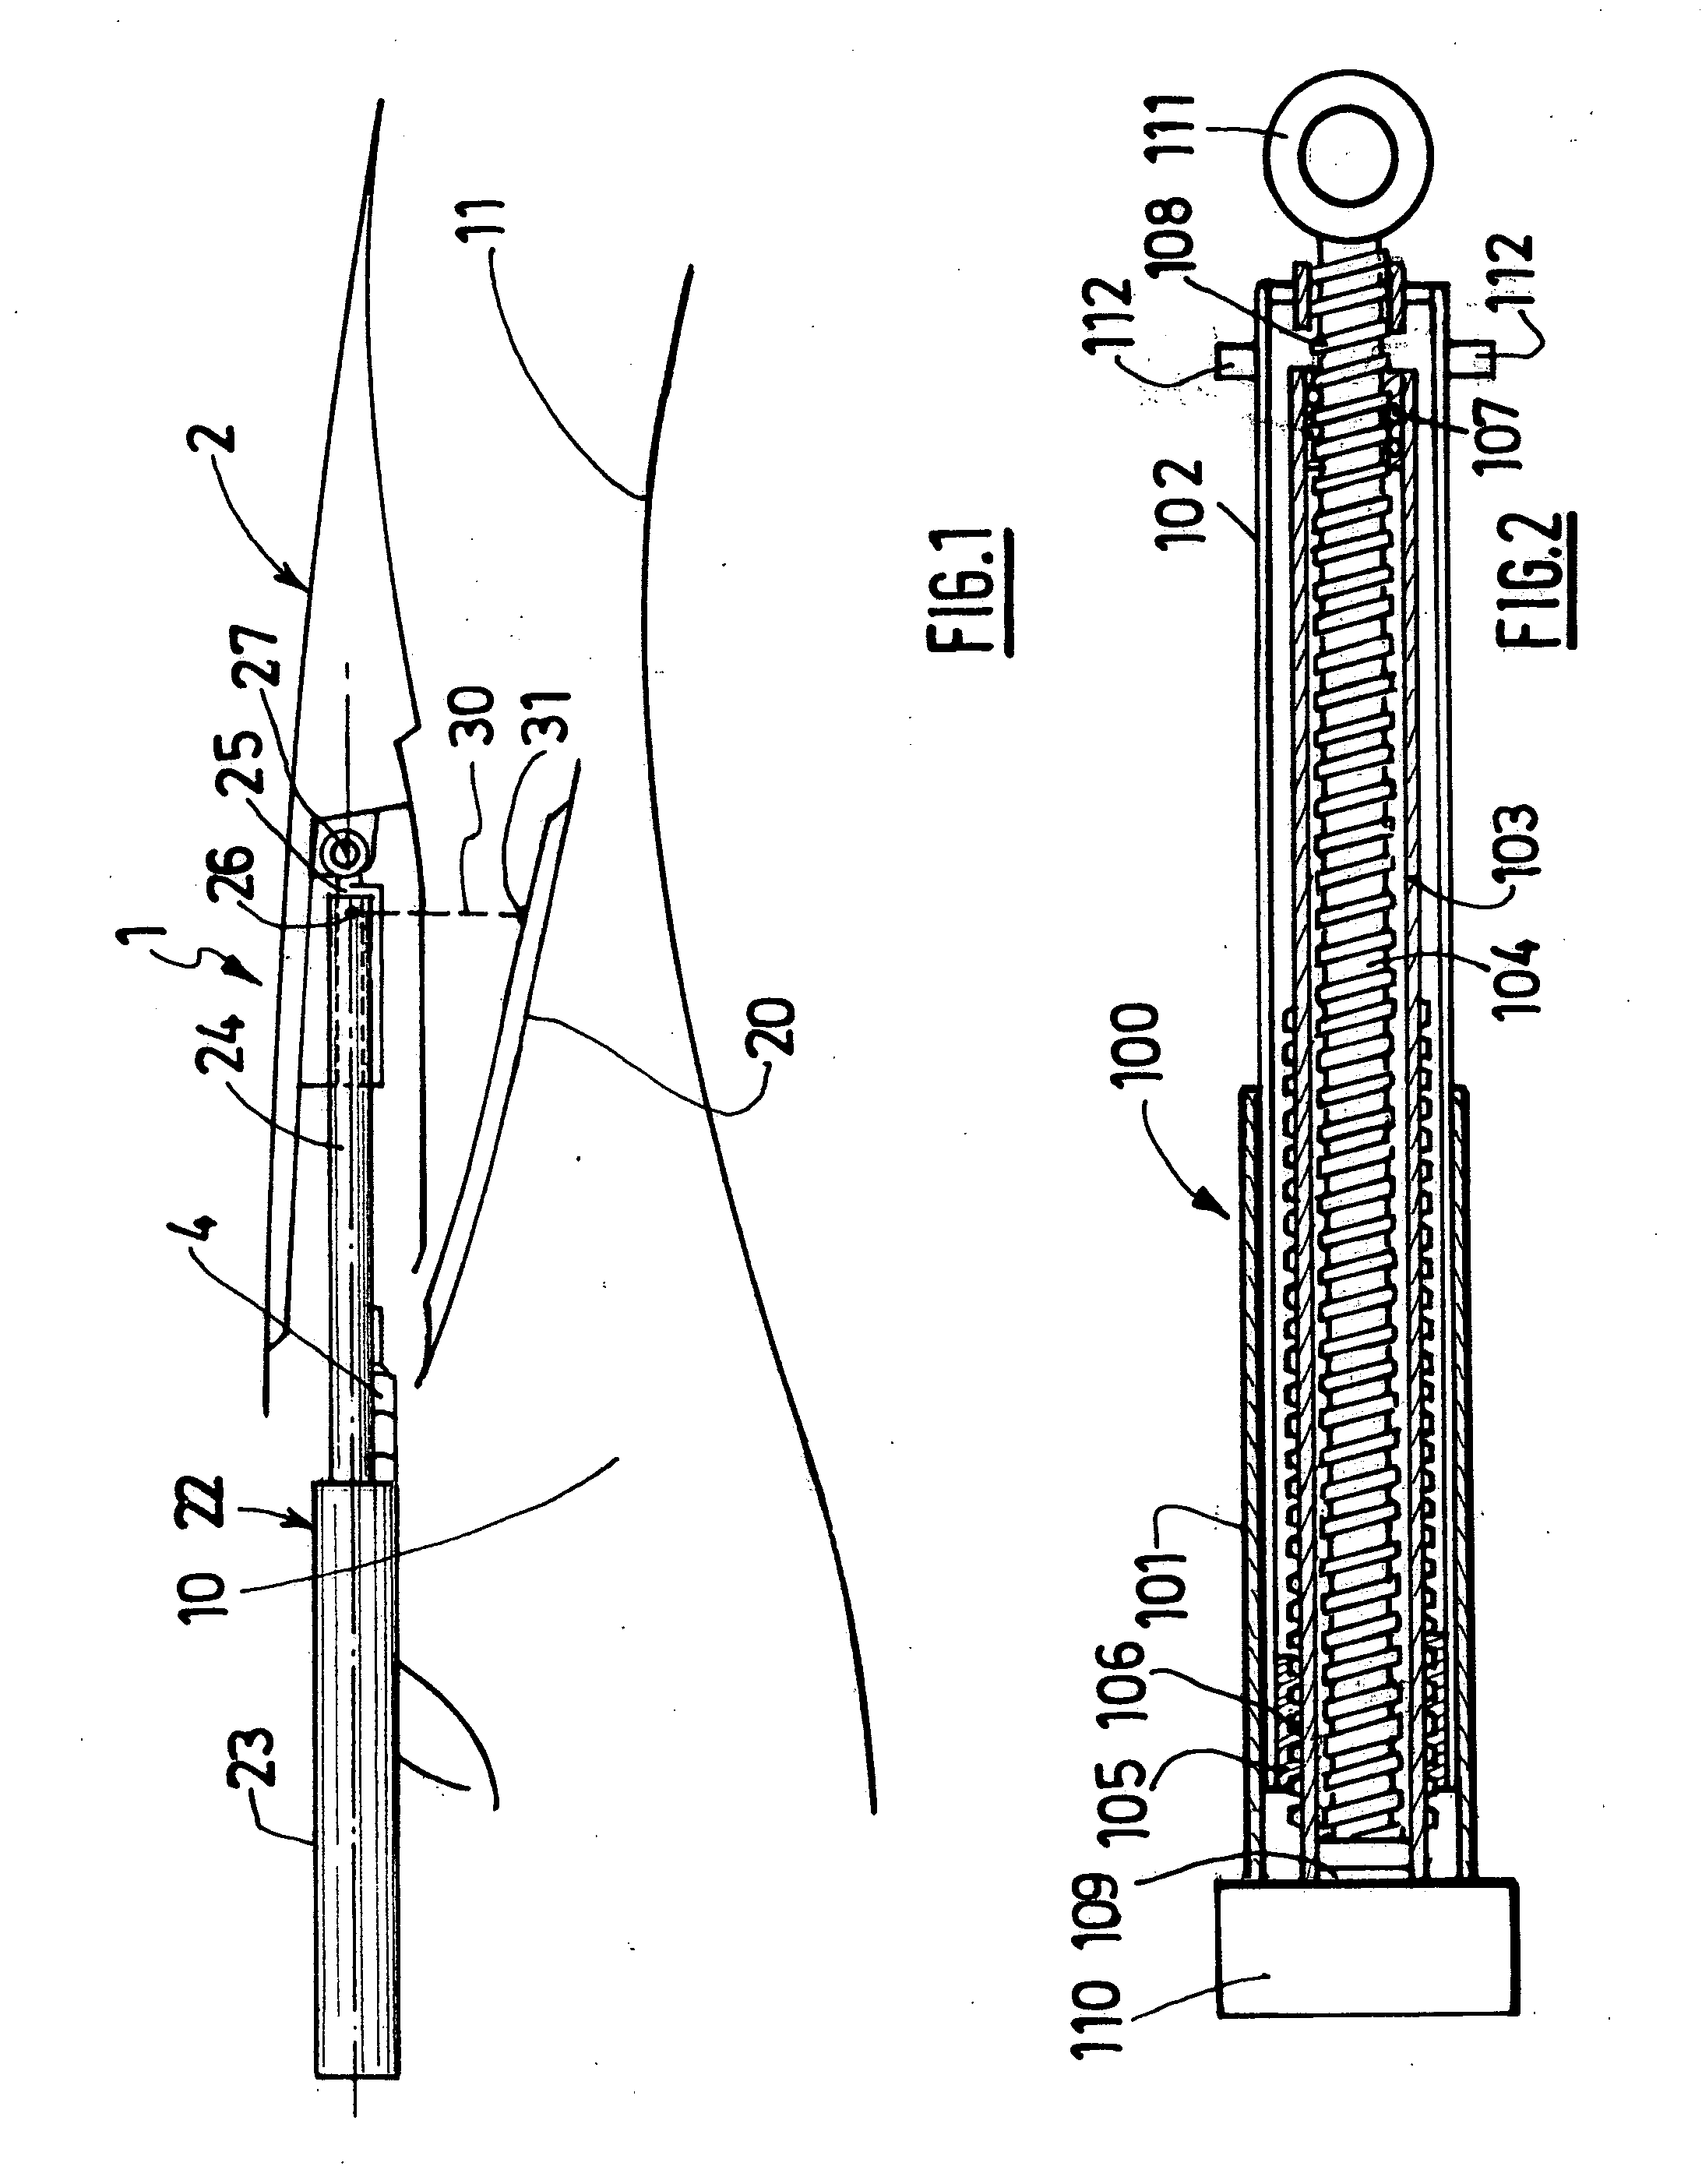 Multiple-acting linear actuator